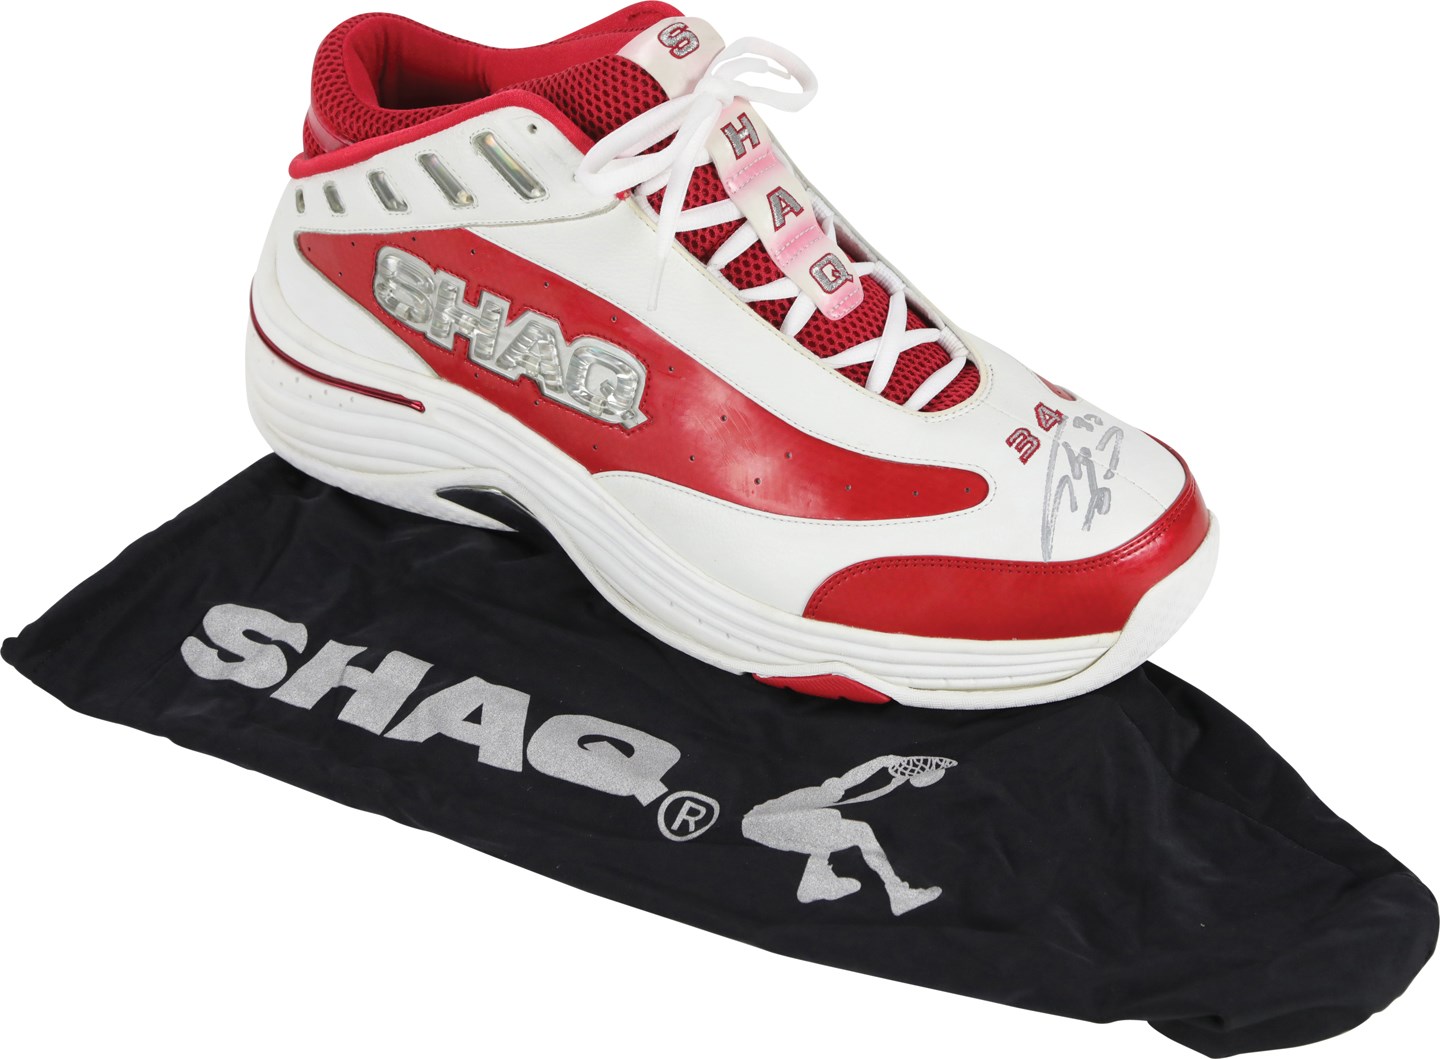 Shaquille O'Neal Size 22 Signed Promotional Sneaker (PSA)